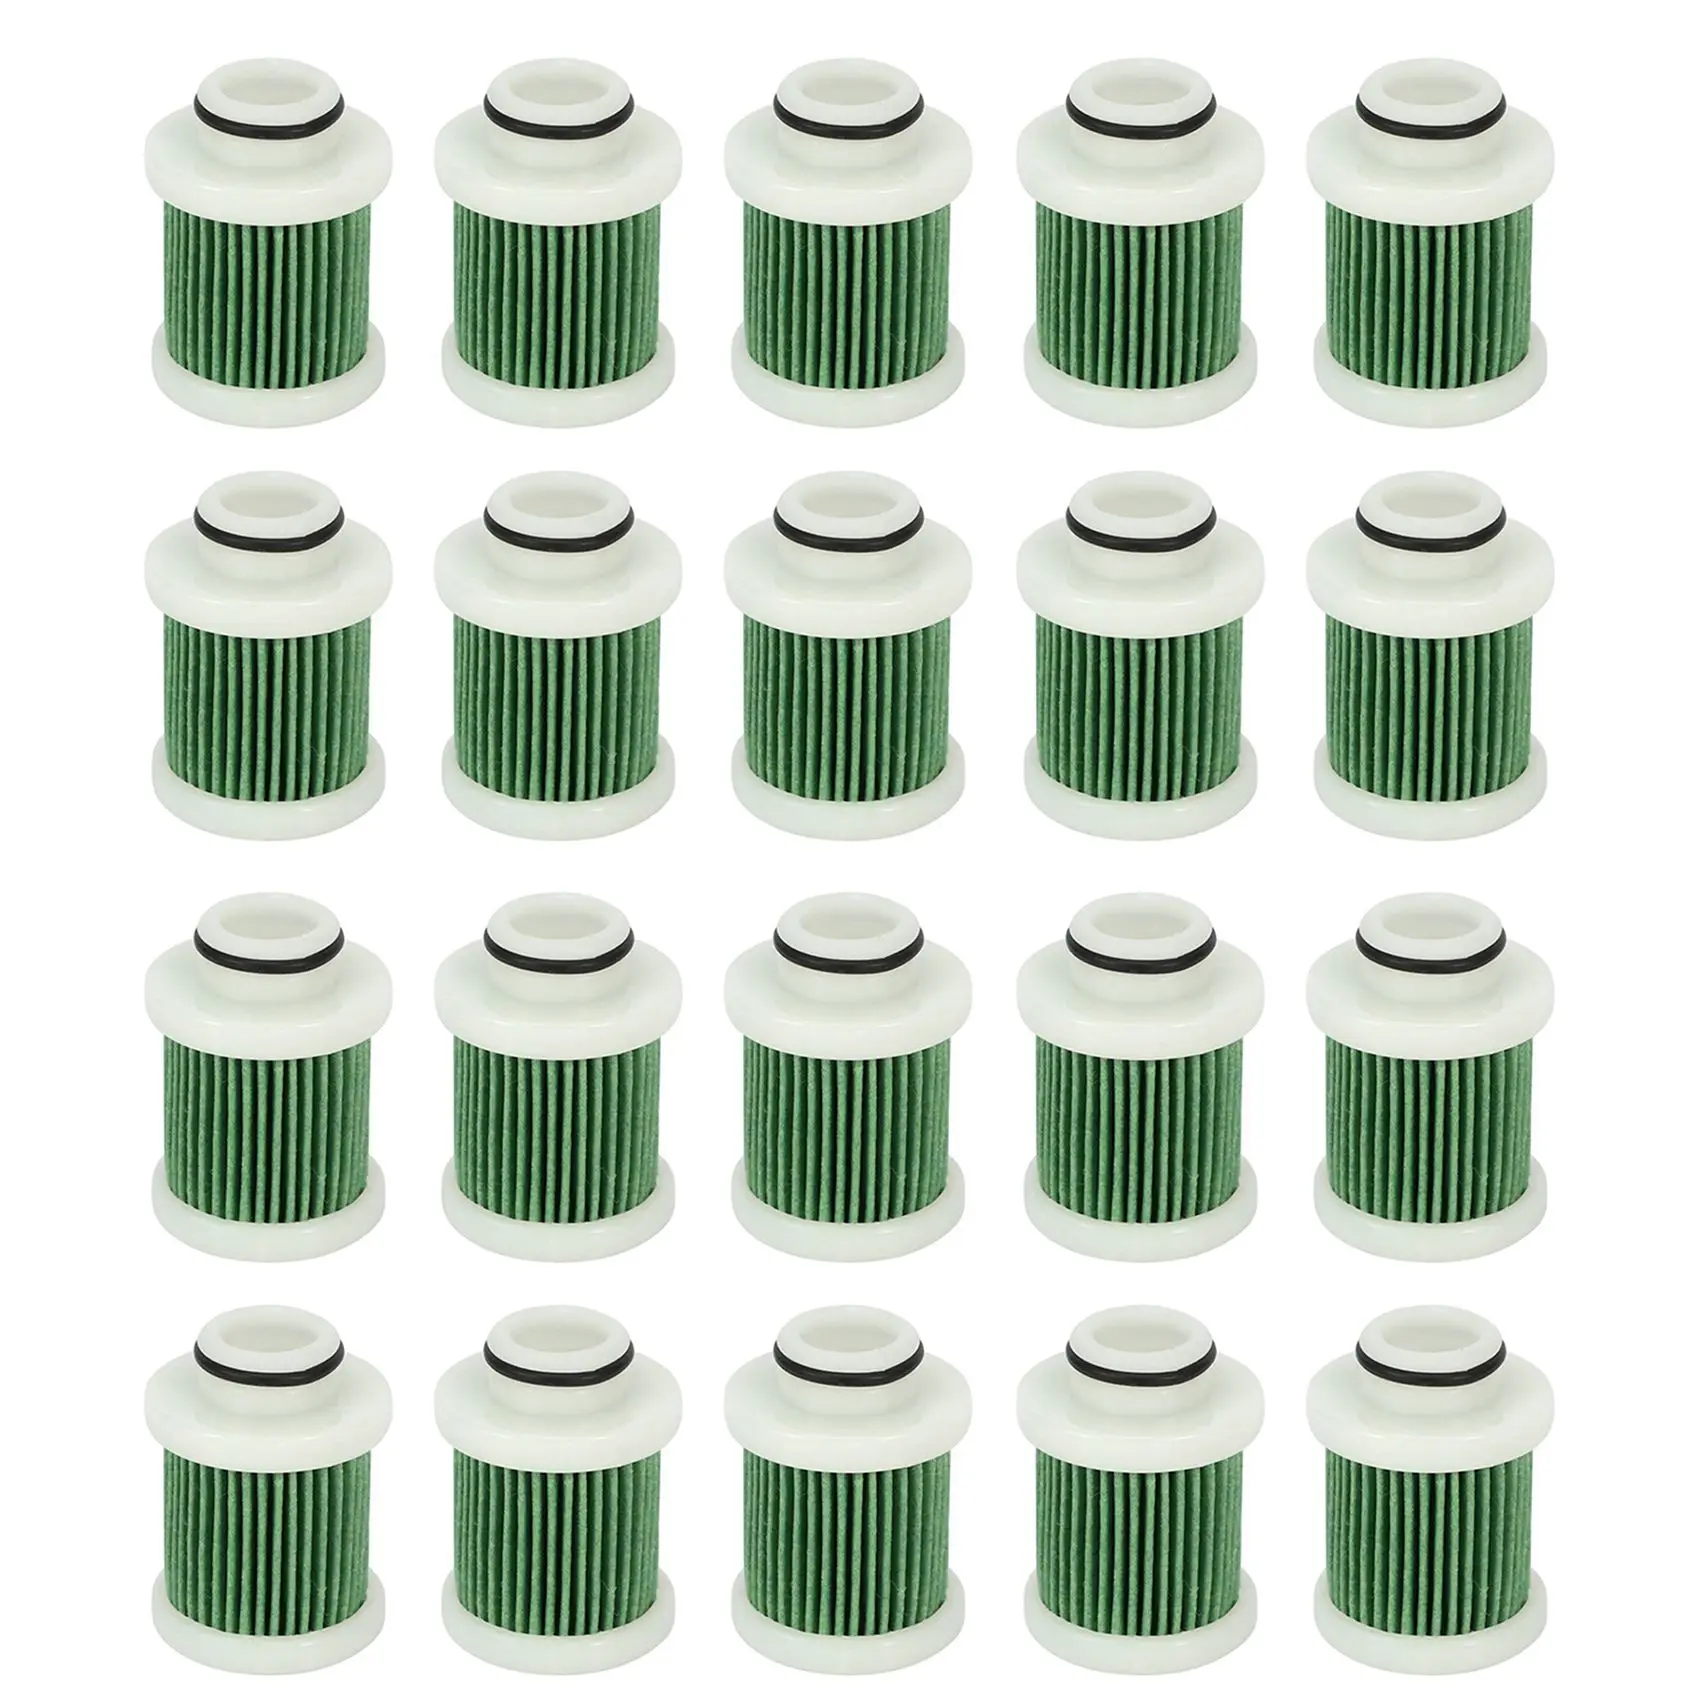 

20Pcs 6D8-WS24A-00 4-Stroke Fuel Filter for Yamaha 40-115Hp F40A F50 T50 F60 T60 Engine Marine Outboard Accessories